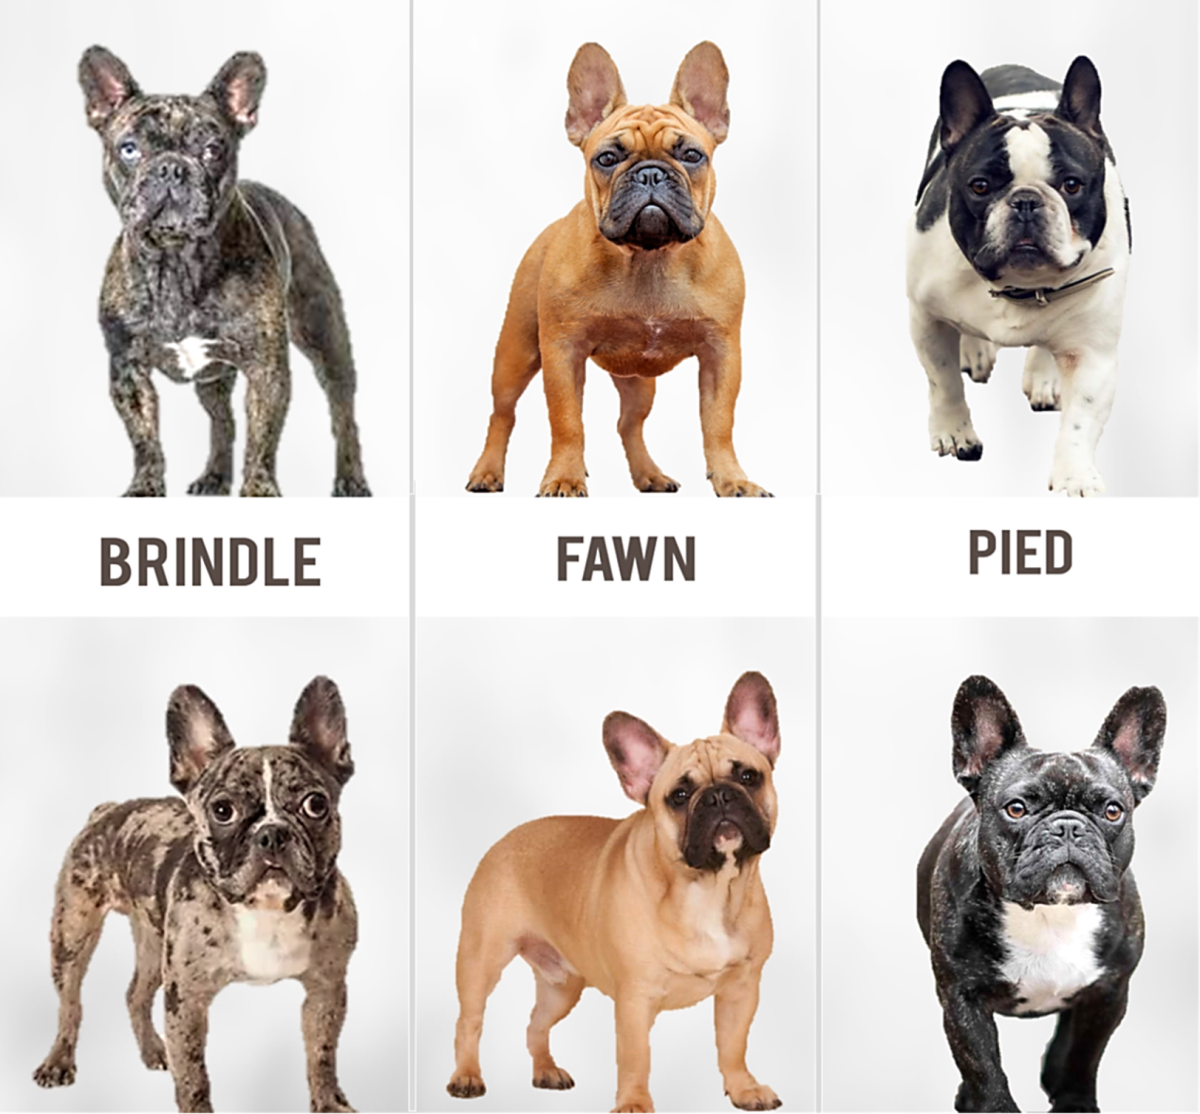 how many french bulldog breeds are there?